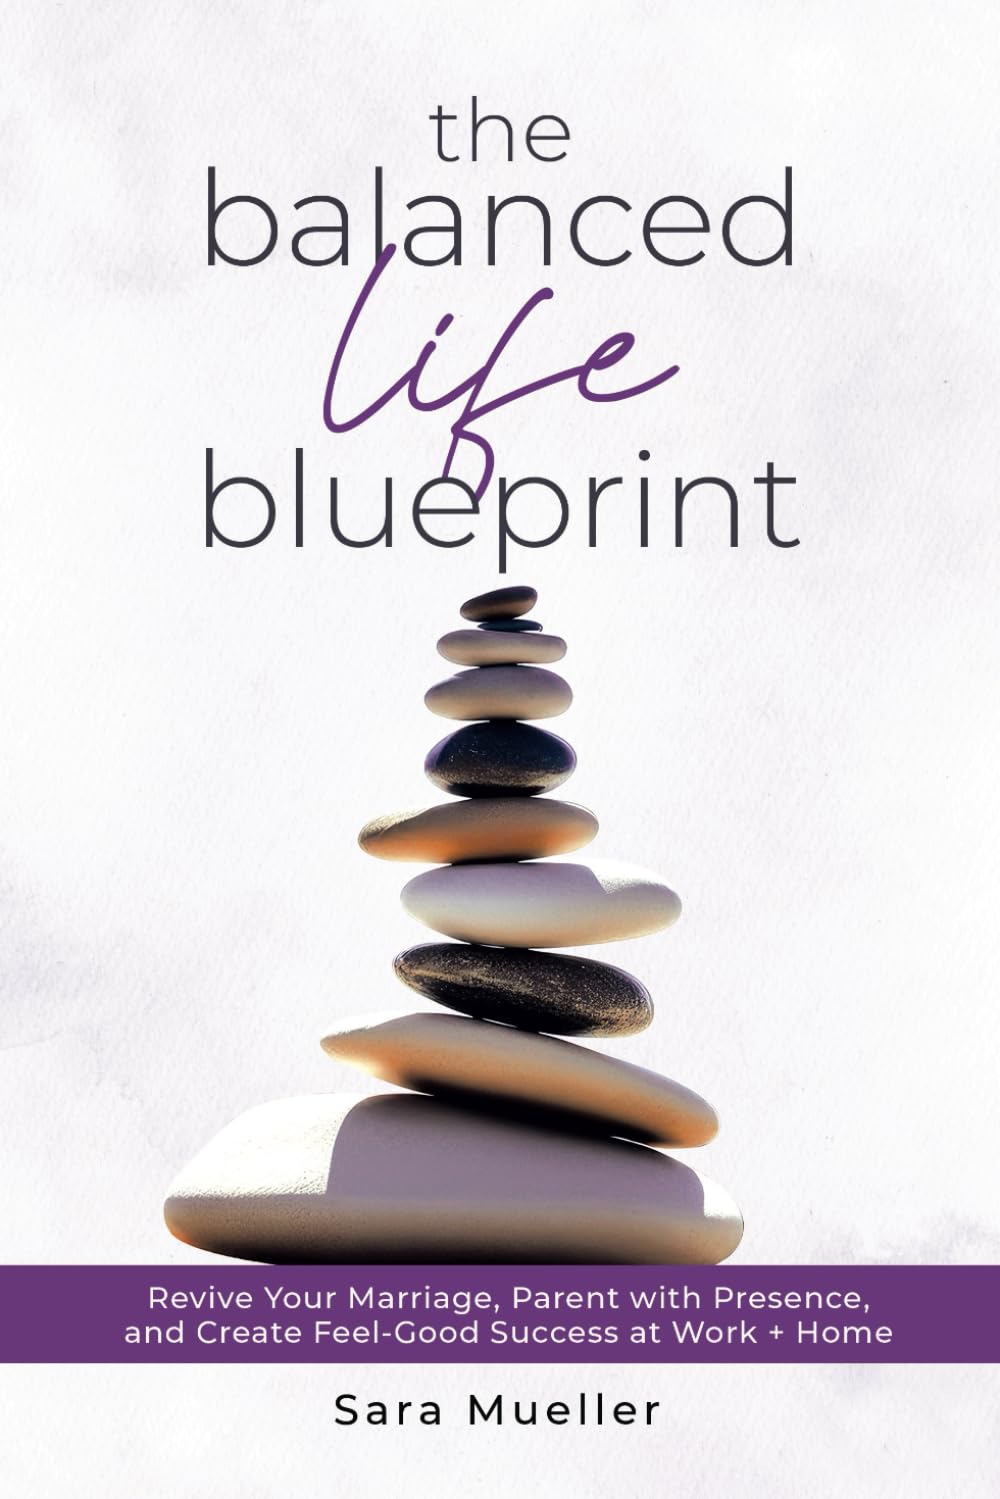 The Balanced Life Blueprint: Revive Your Marriage, Parent With Presence, and Create Feel-Good Success at Work + Home